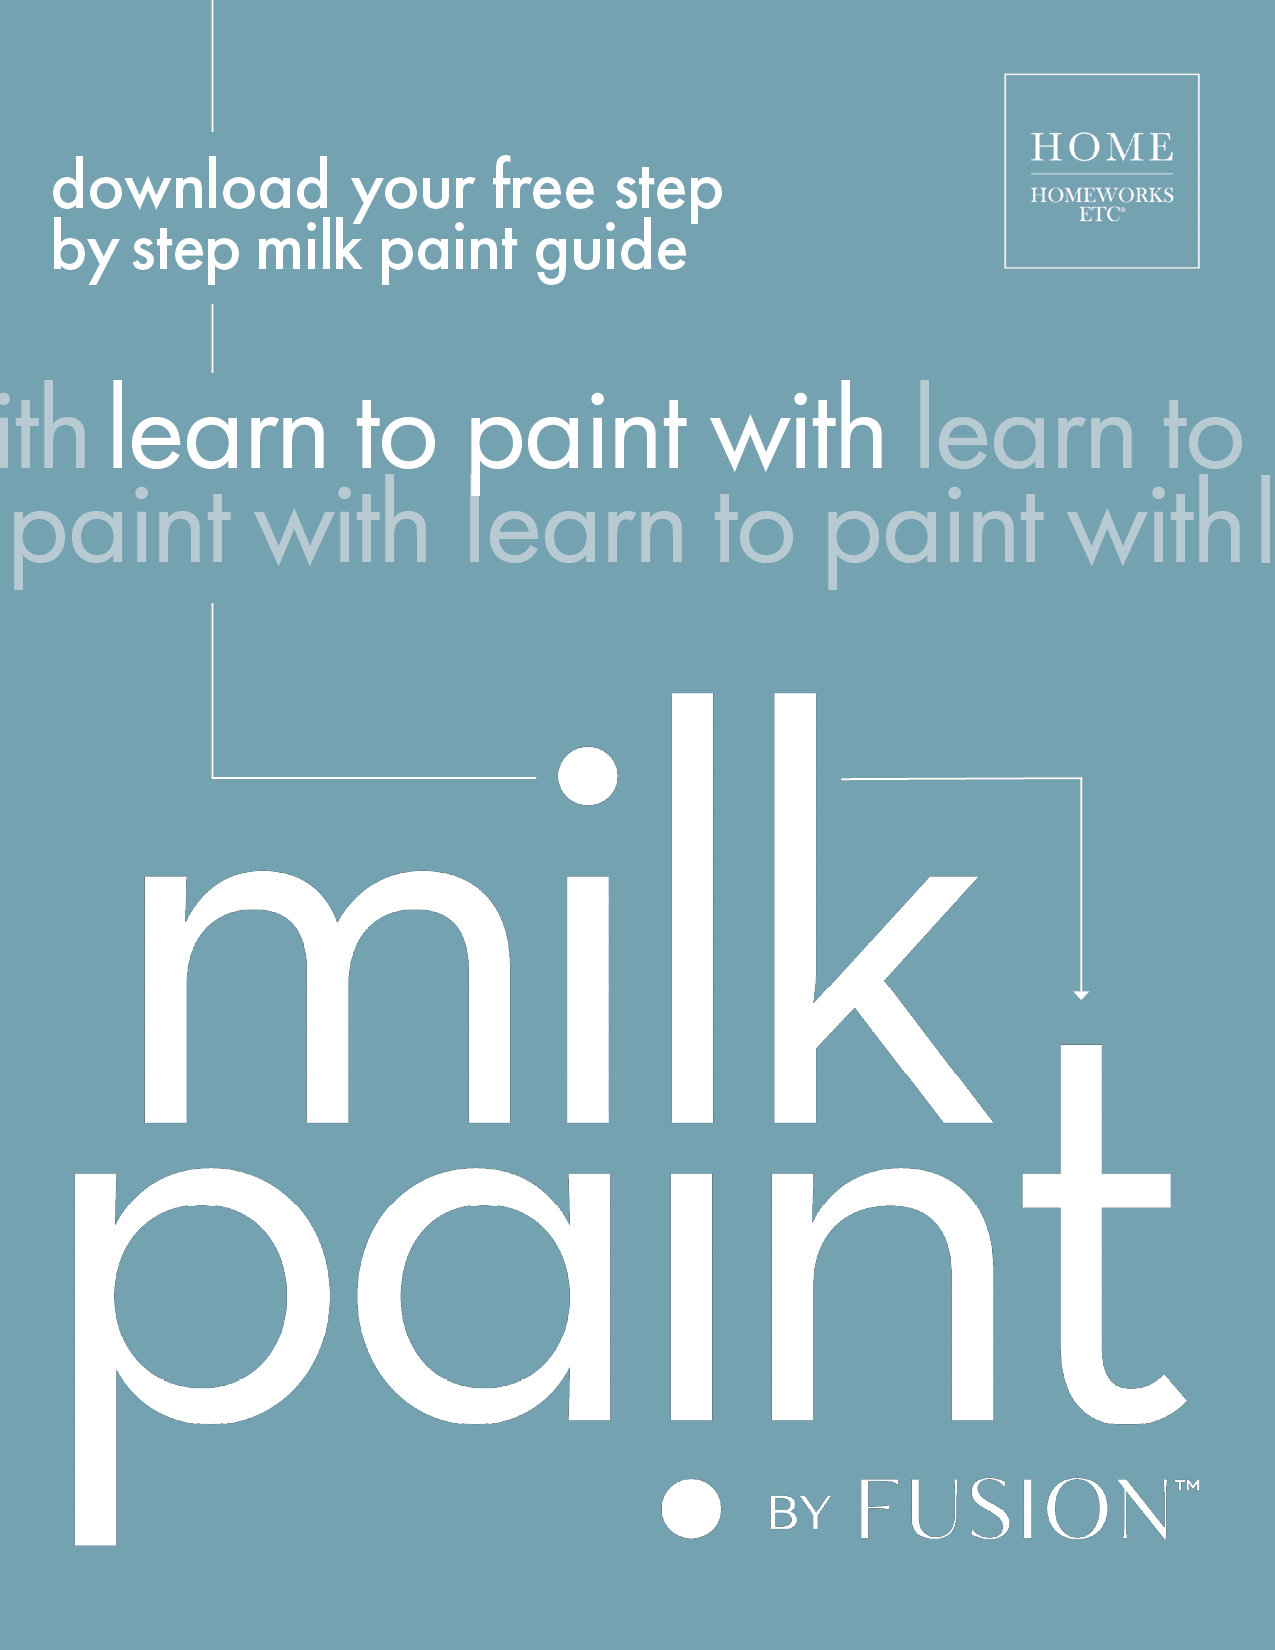 Free Learning to paint with Milk Paint by Fusion Guide!